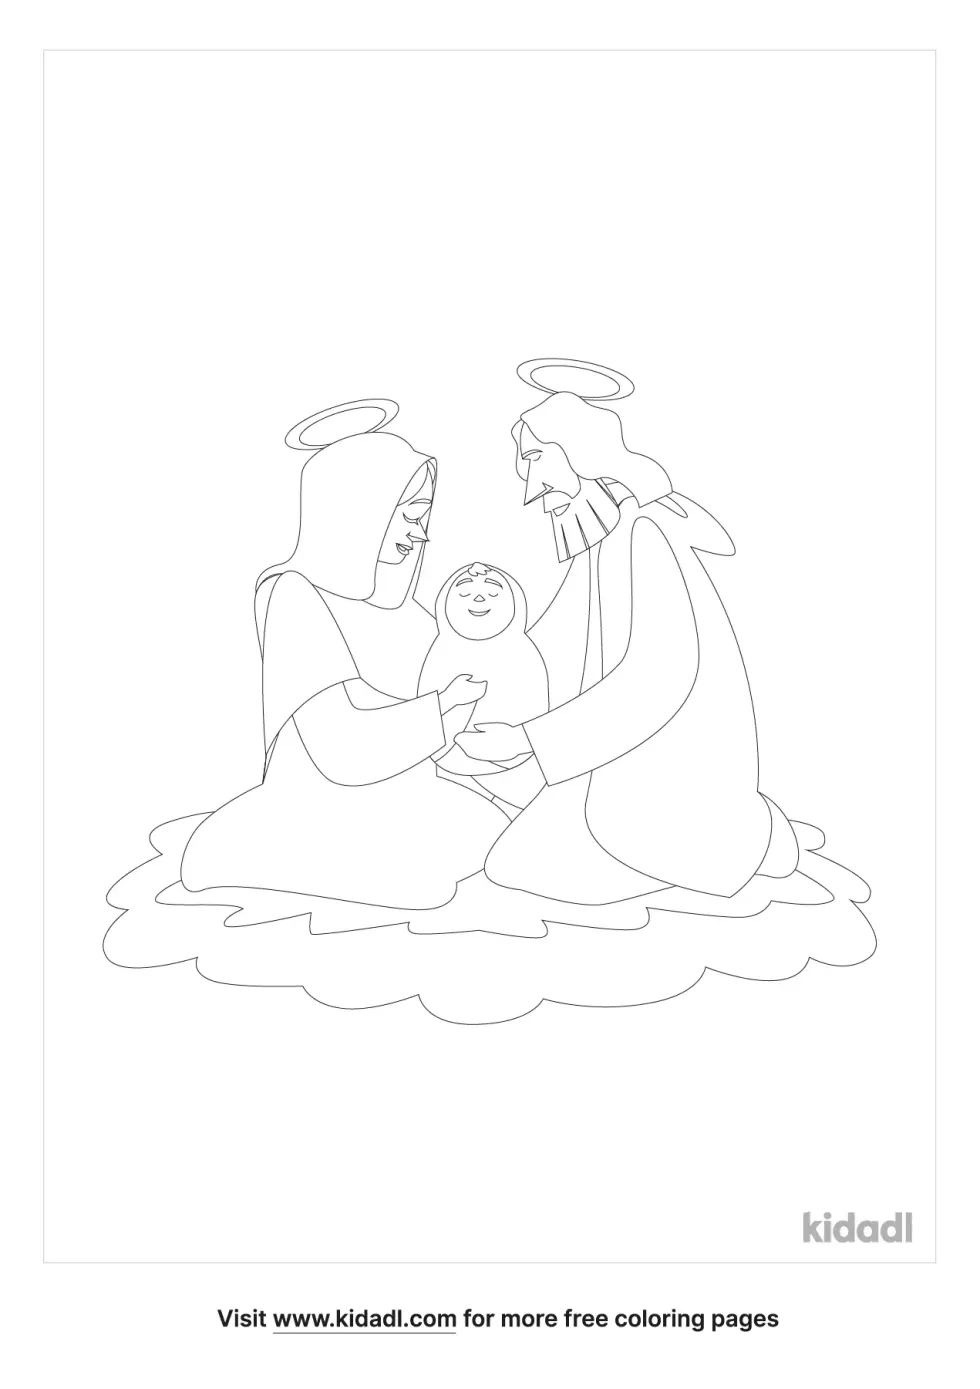 The Holy Family Coloring Page